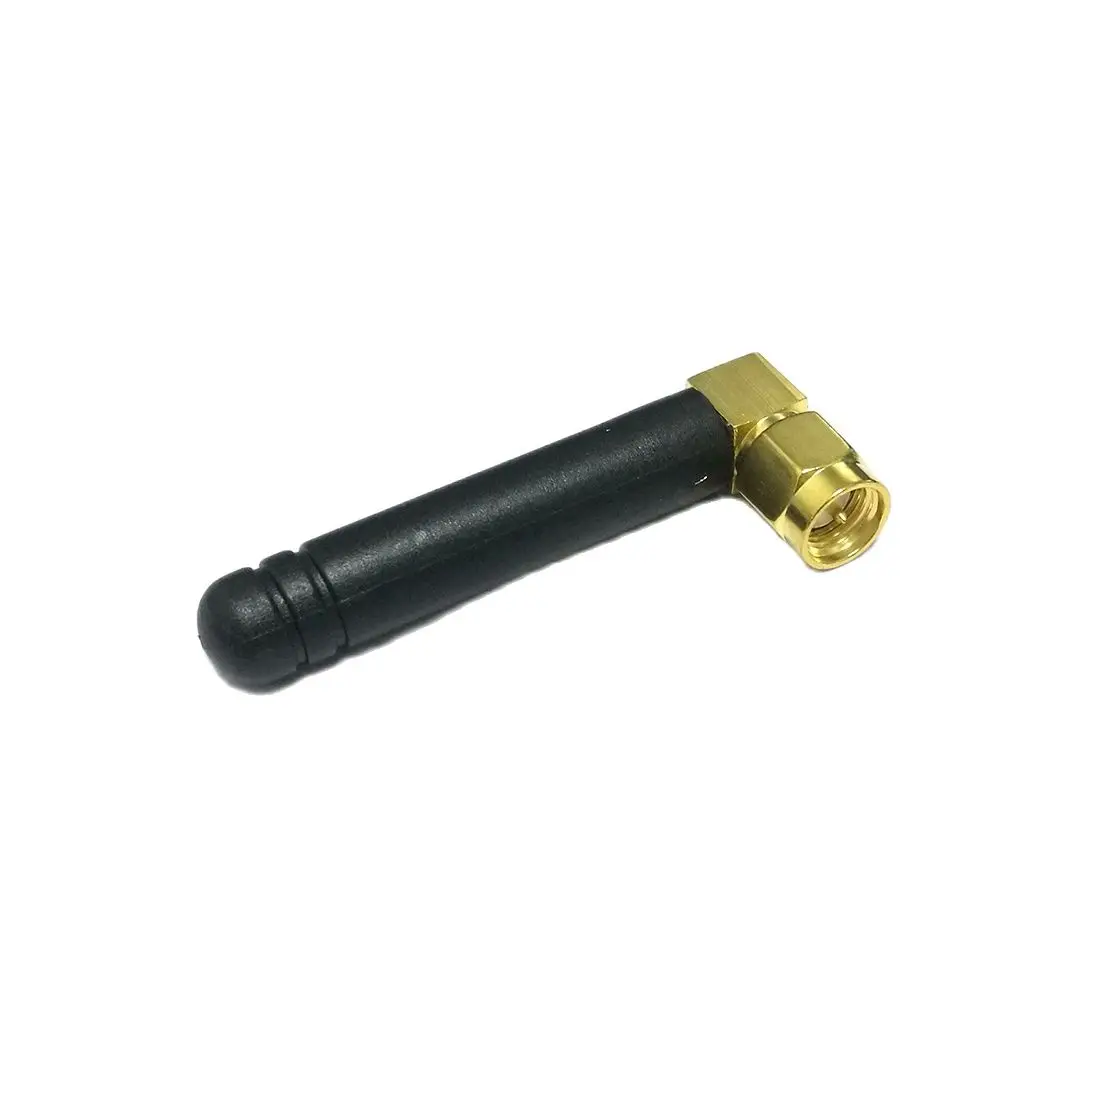 1PC 3G GSM Antenna 900-2100MHZ 2dbi Omni Aerial with SMA Male Right Angle Connector 5cm Long for 3G Wireless Modem